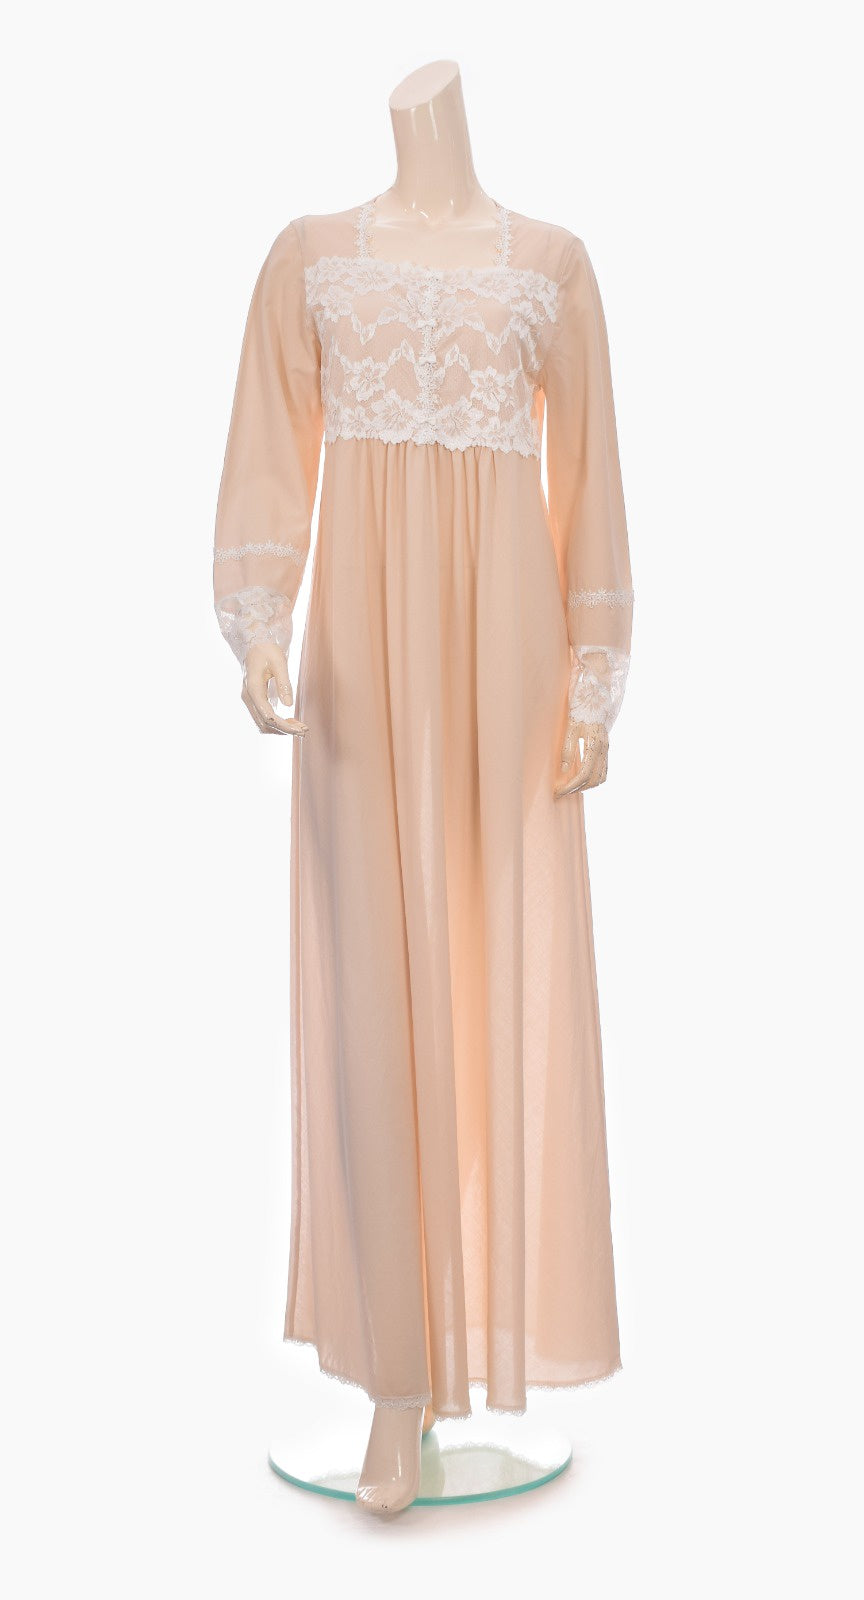 Beige Cotton Morning Gown General Coco Box 